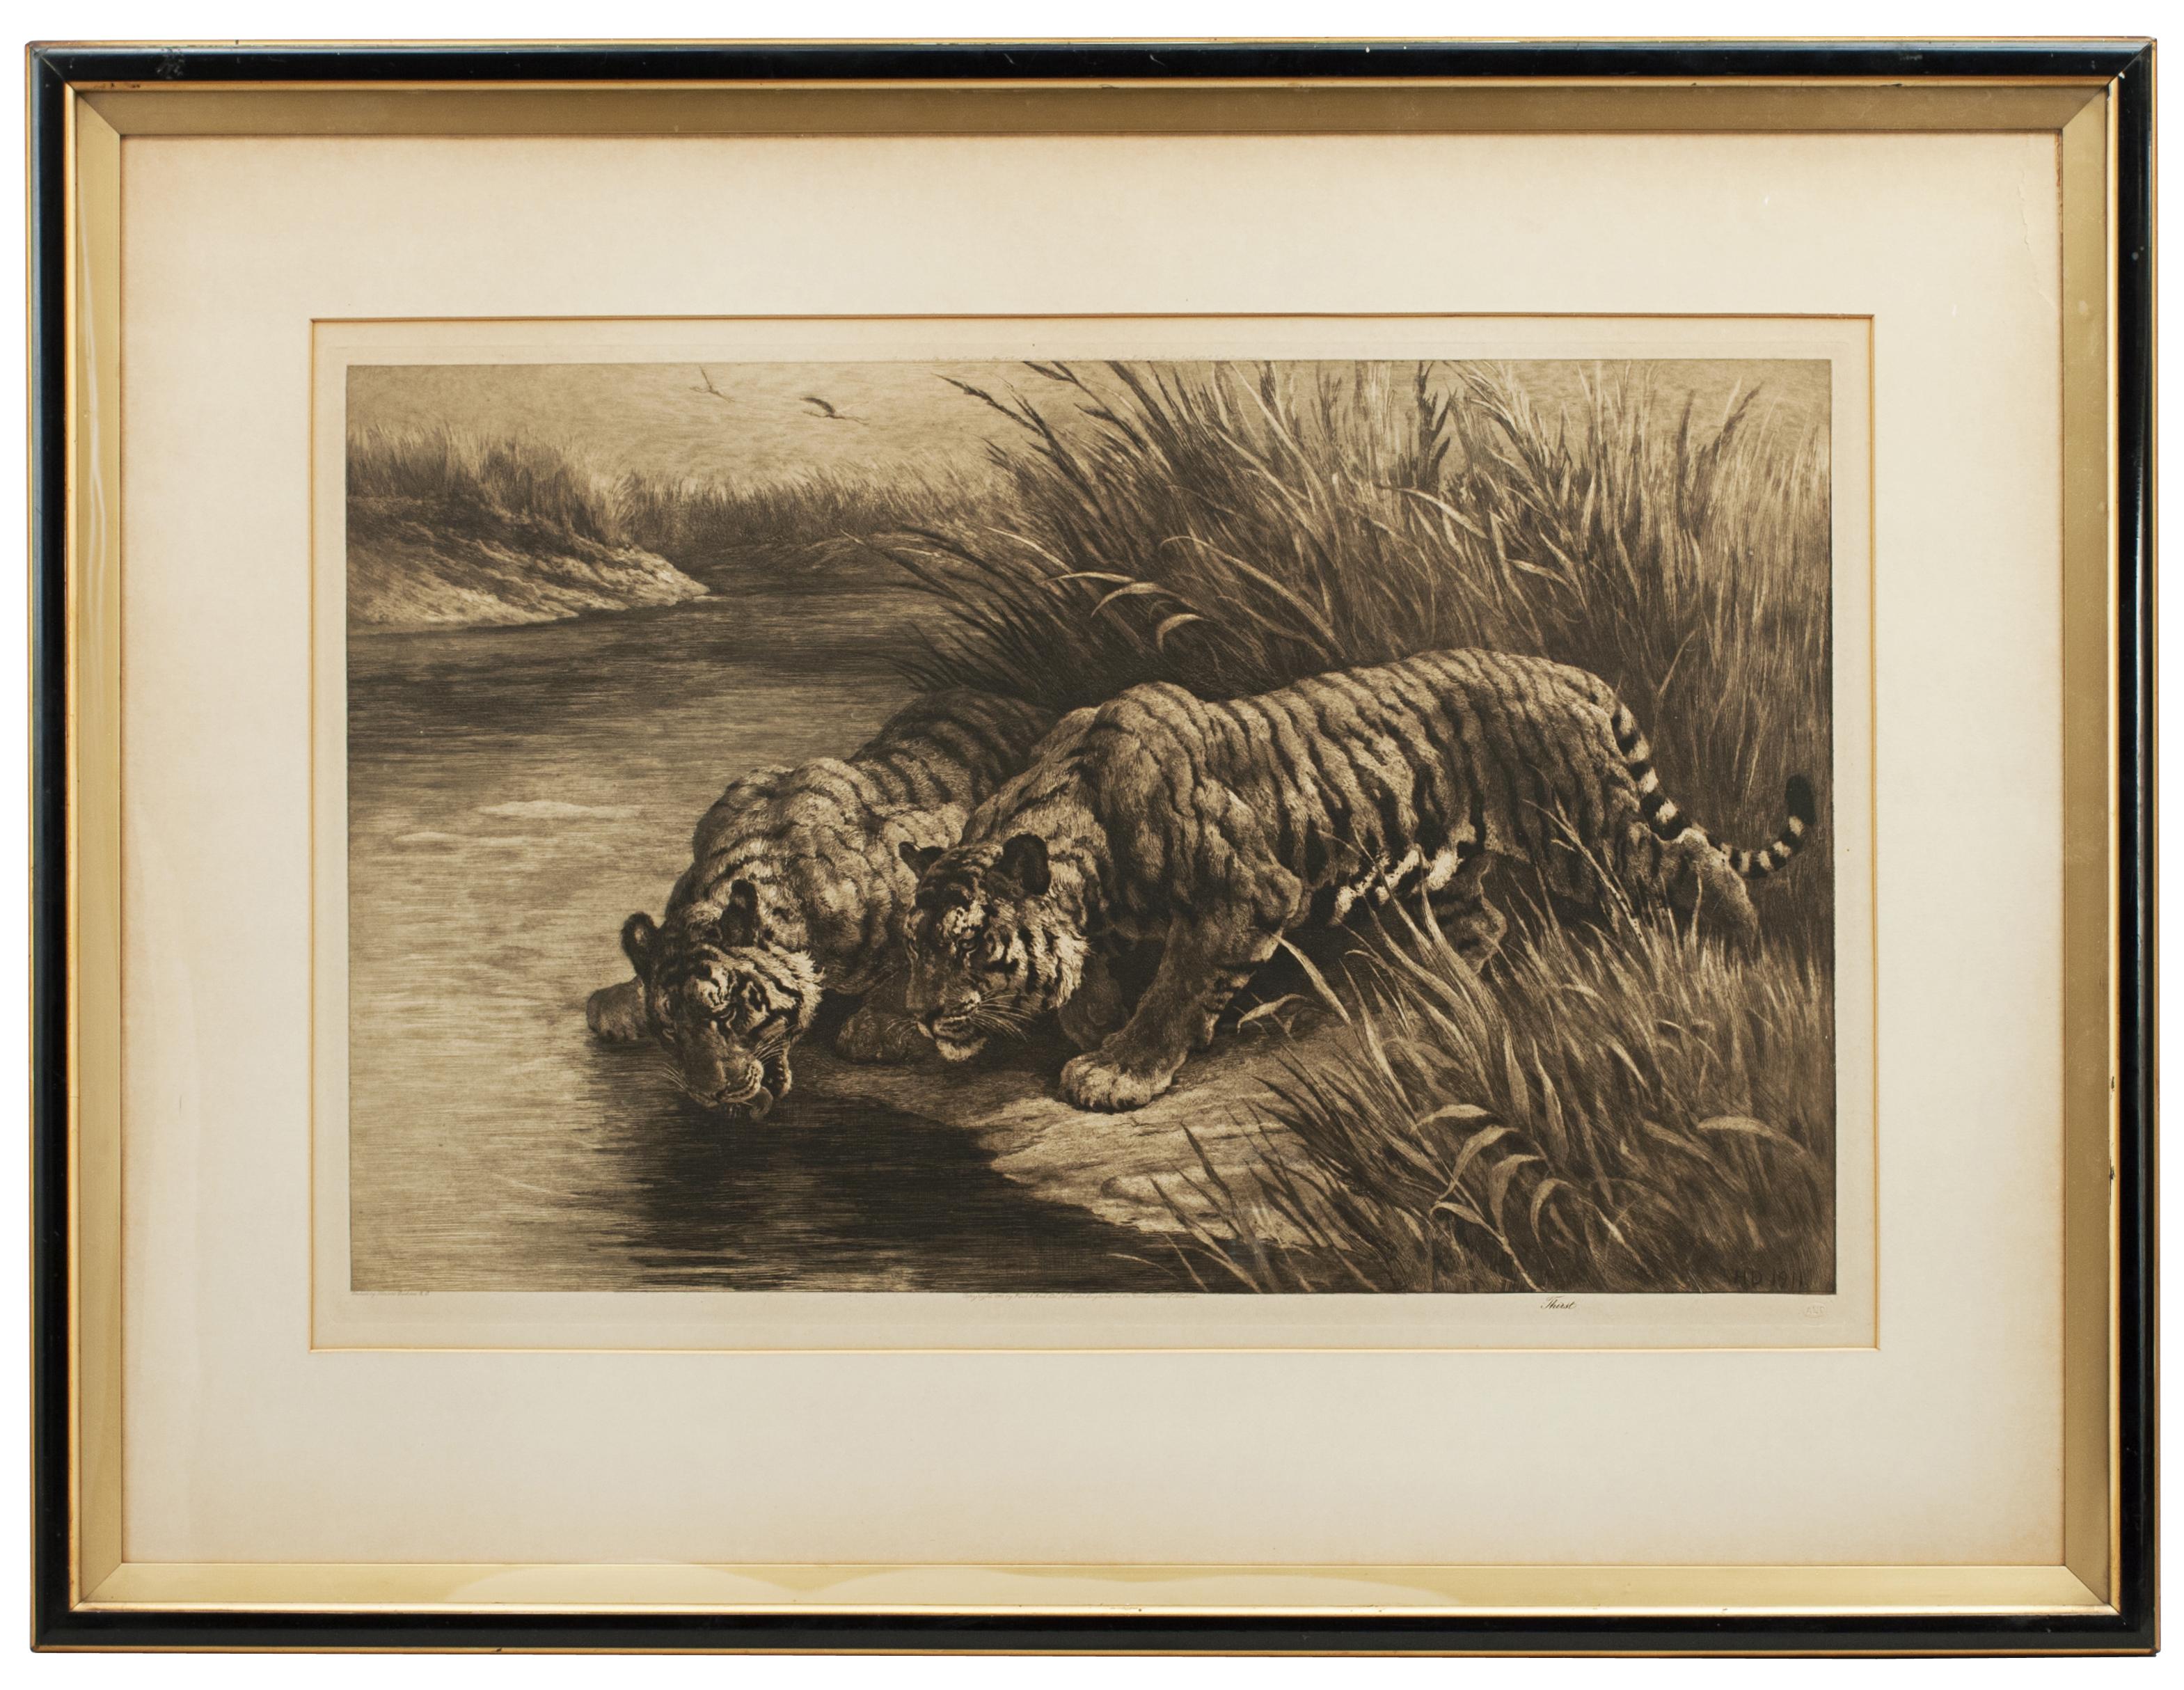 A wonderful wildlife etching by Herbert Dicksee, 'Thirst'
A framed wildlife picture of a pair of tigers crouching, drinking from a meandering river. The powerful etching is by Herbert Thomas Dickse, after his original artwork, published October